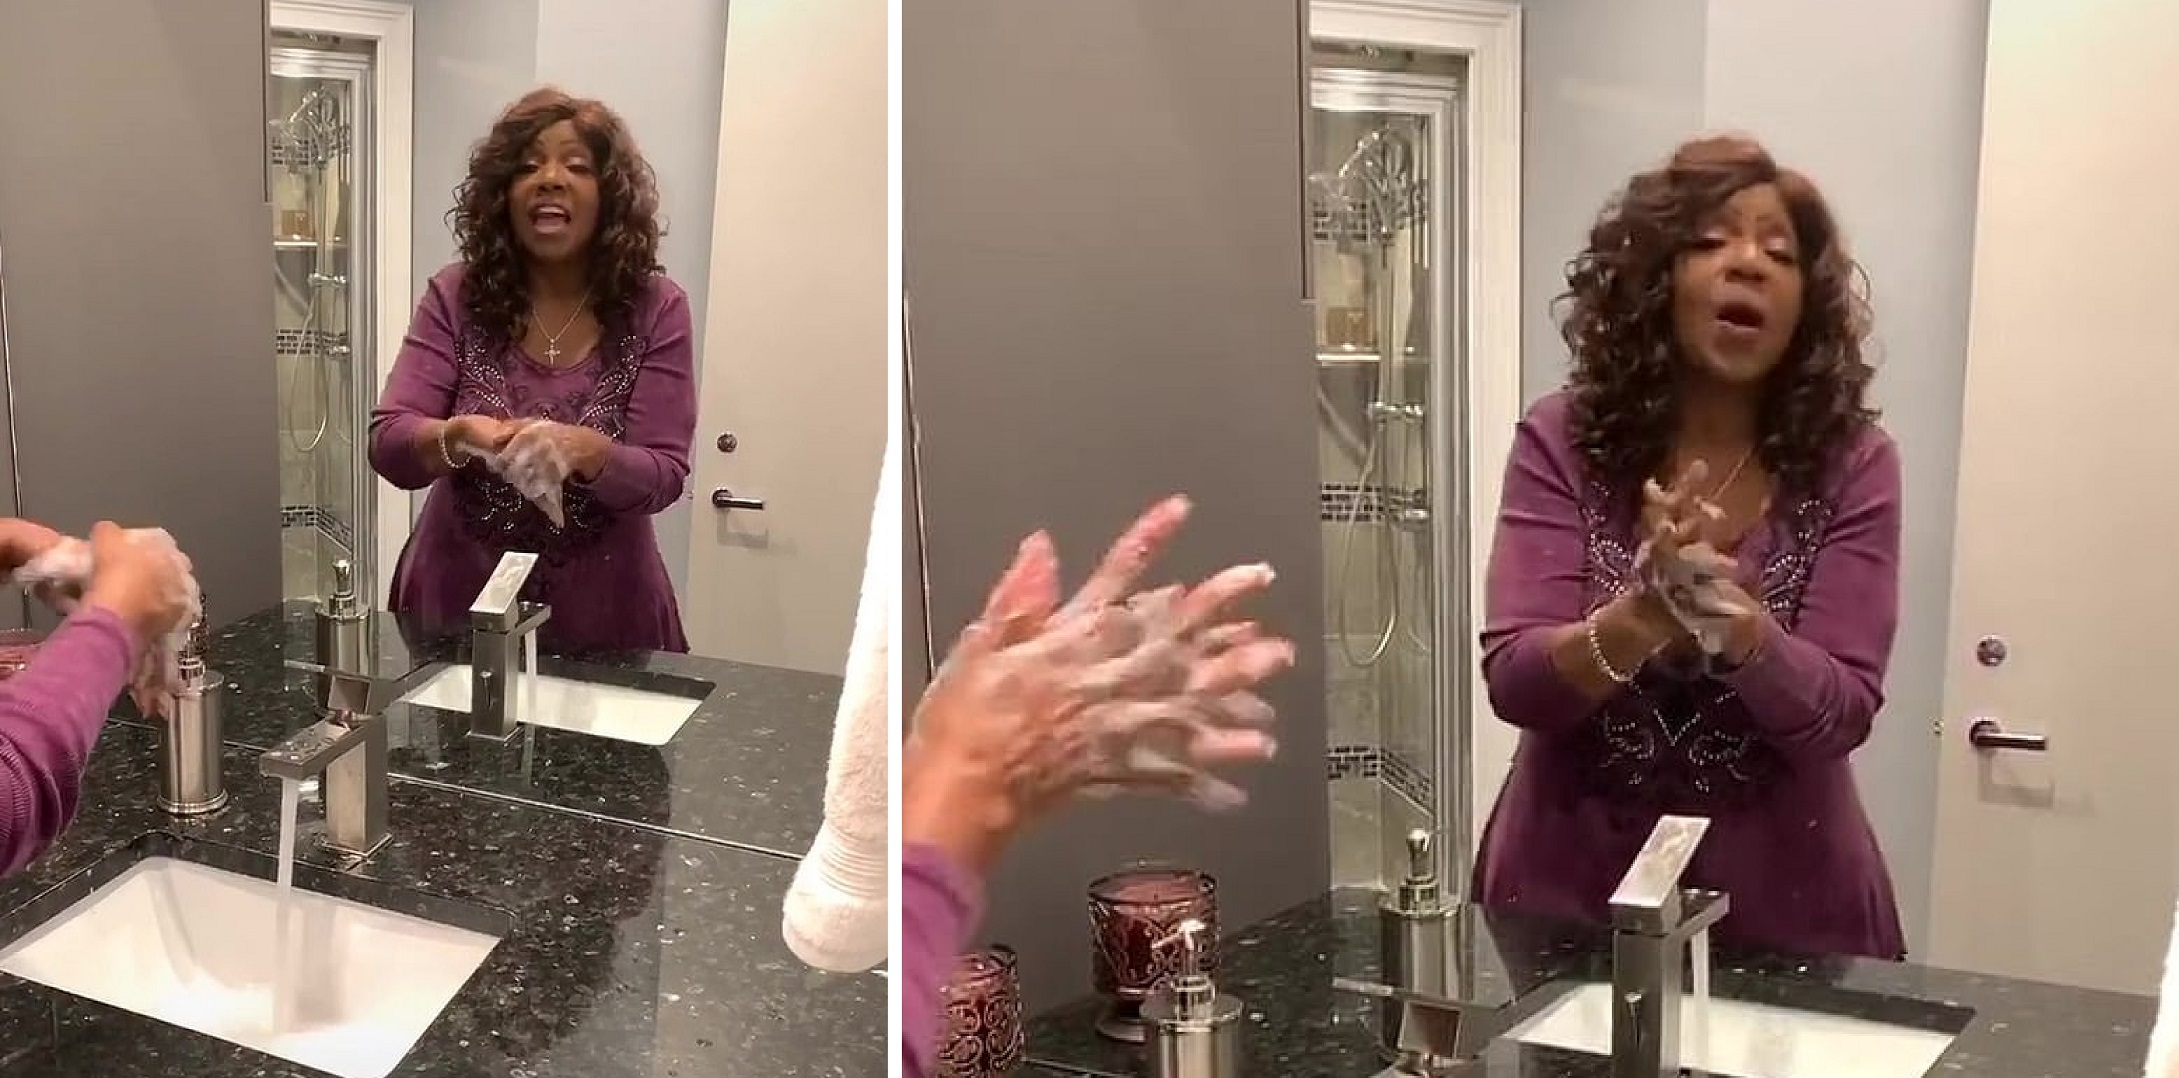 Coronavirus Pandemic: Gloria Gaynor Washes Her Hands While Jamming To Her Classic, ‘I Will Survive’